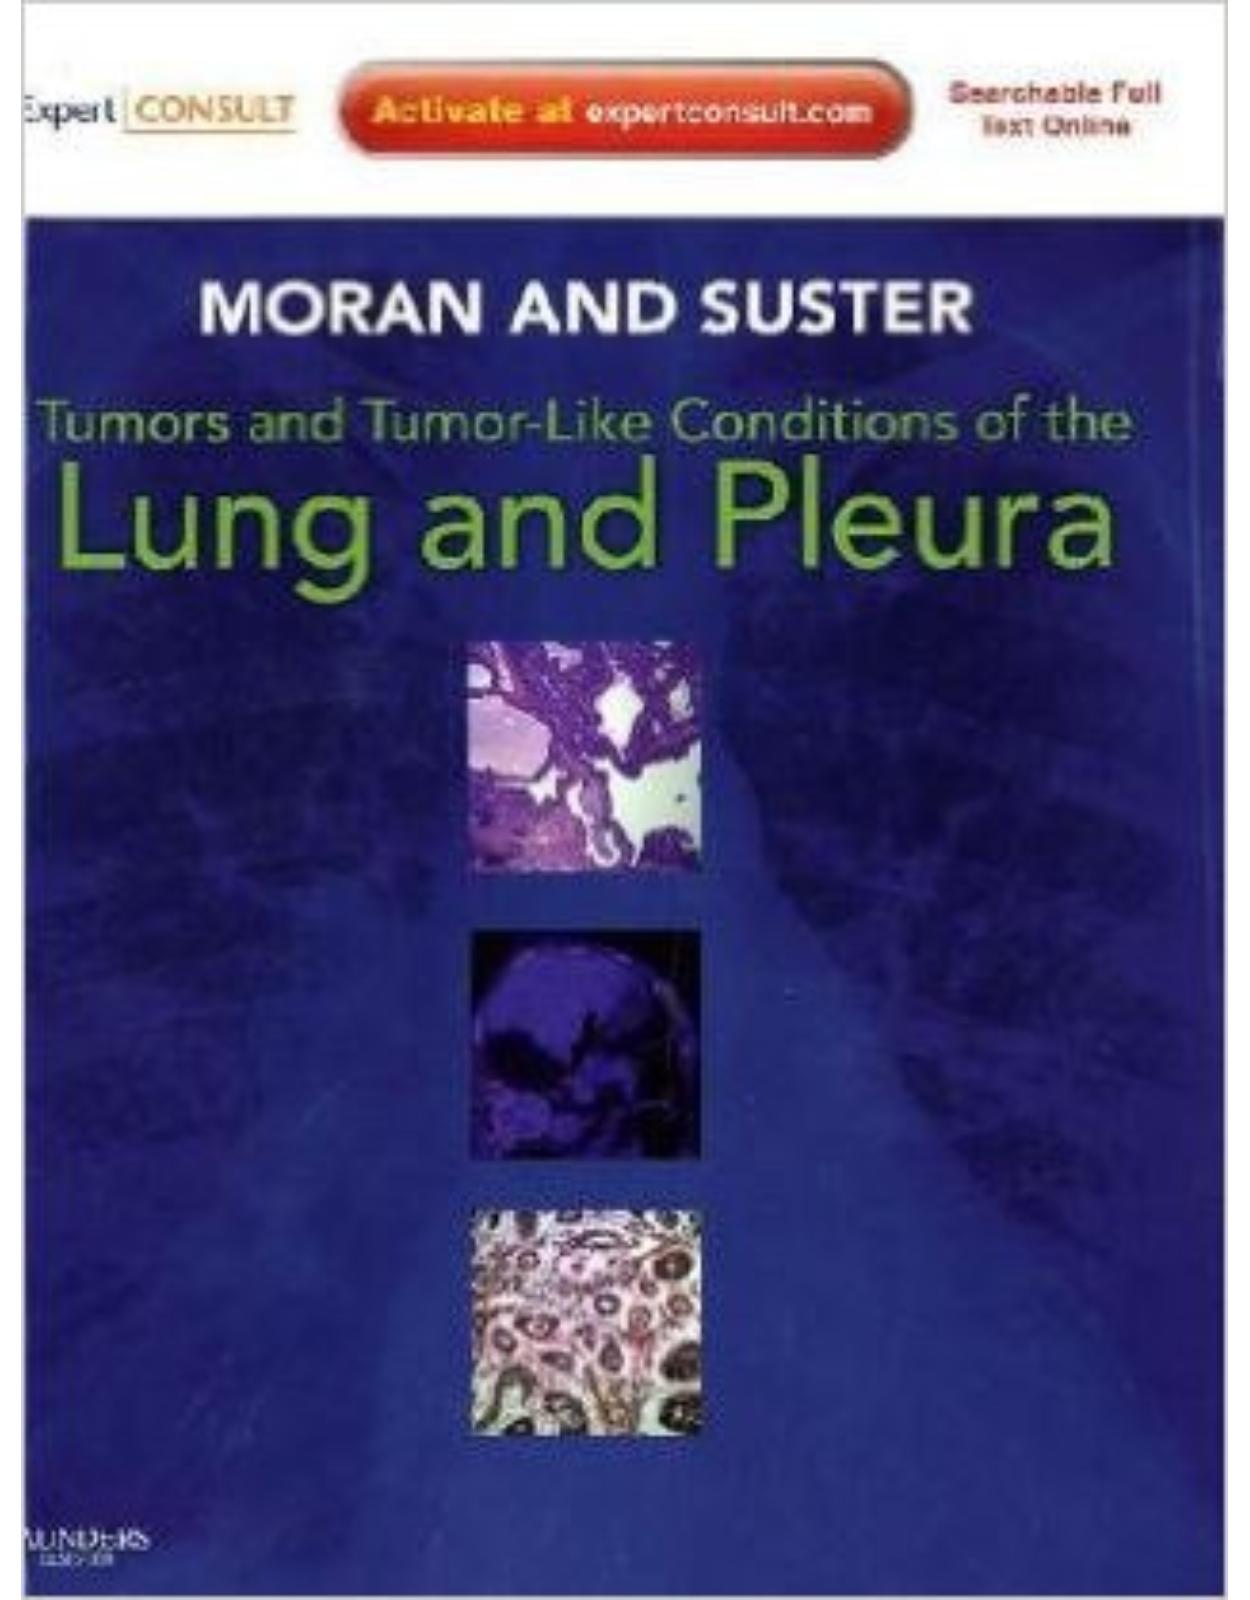 Tumors and Tumor-like Conditions of the Lung and Pleura: Expert Consult: Online and Print, 1e